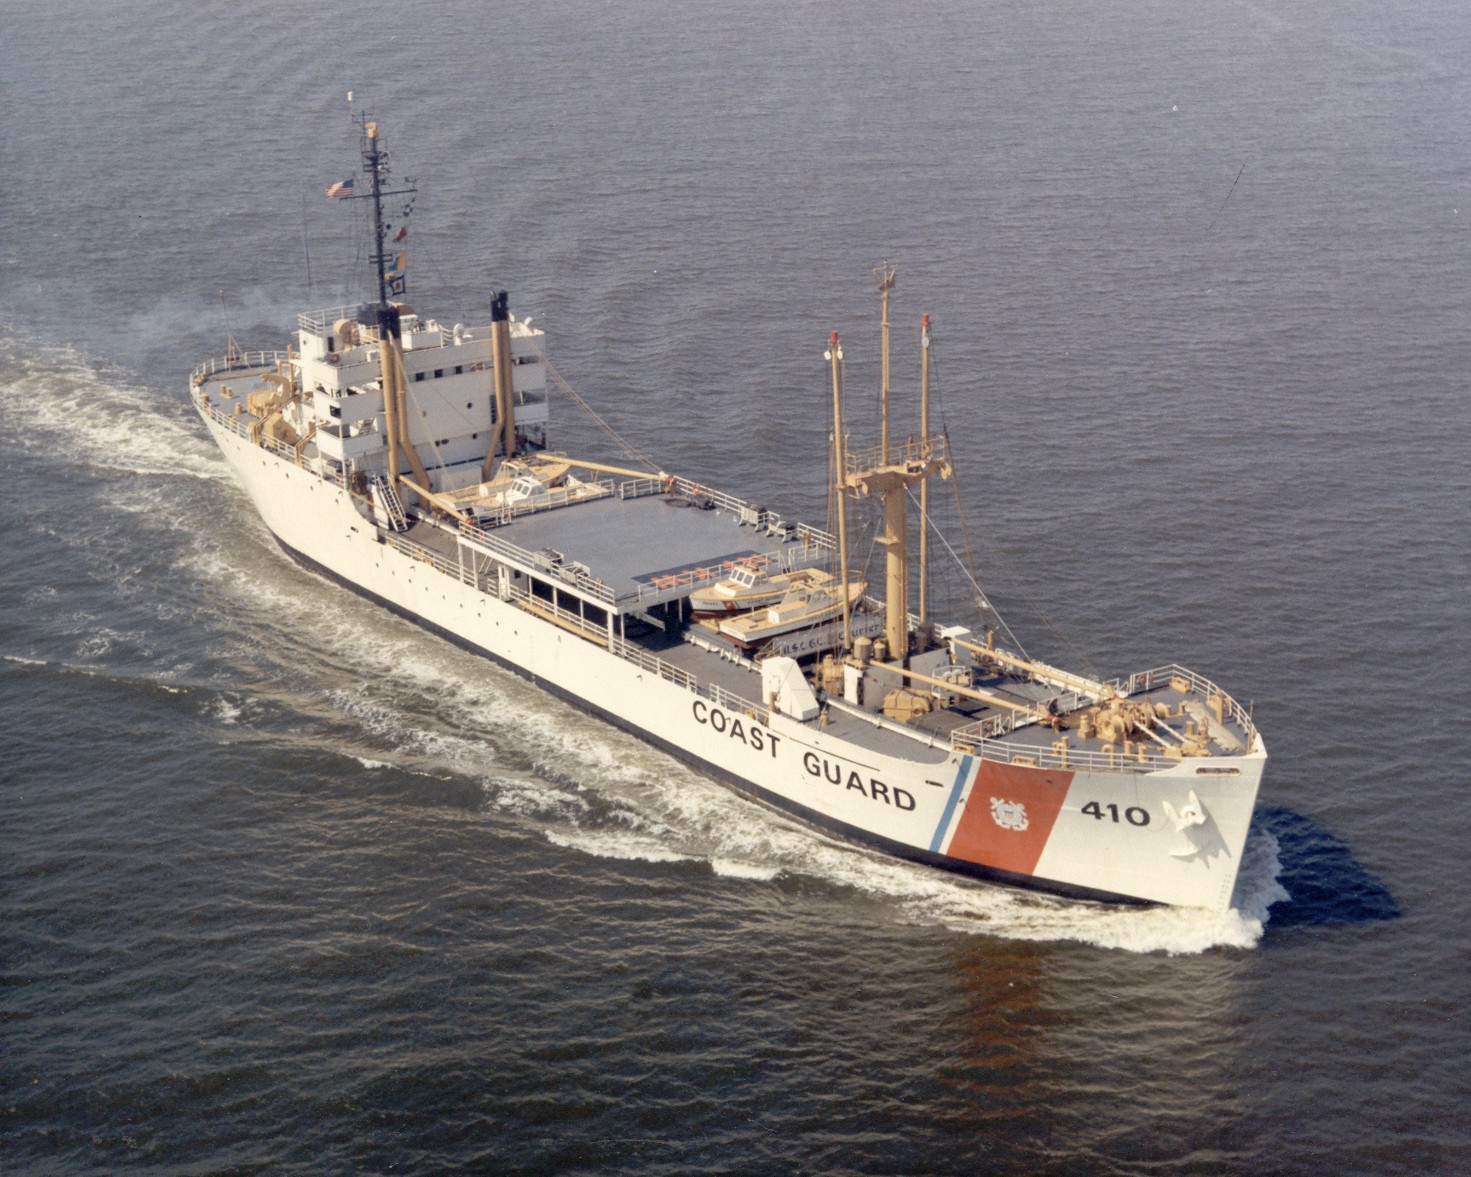 After its service as a VOA floating transmitter, Coast Guard Courier became Coast Guard Reserve training ship WTR-410, stationed at Training Center Yorktown. (U.S. Coast Guard)